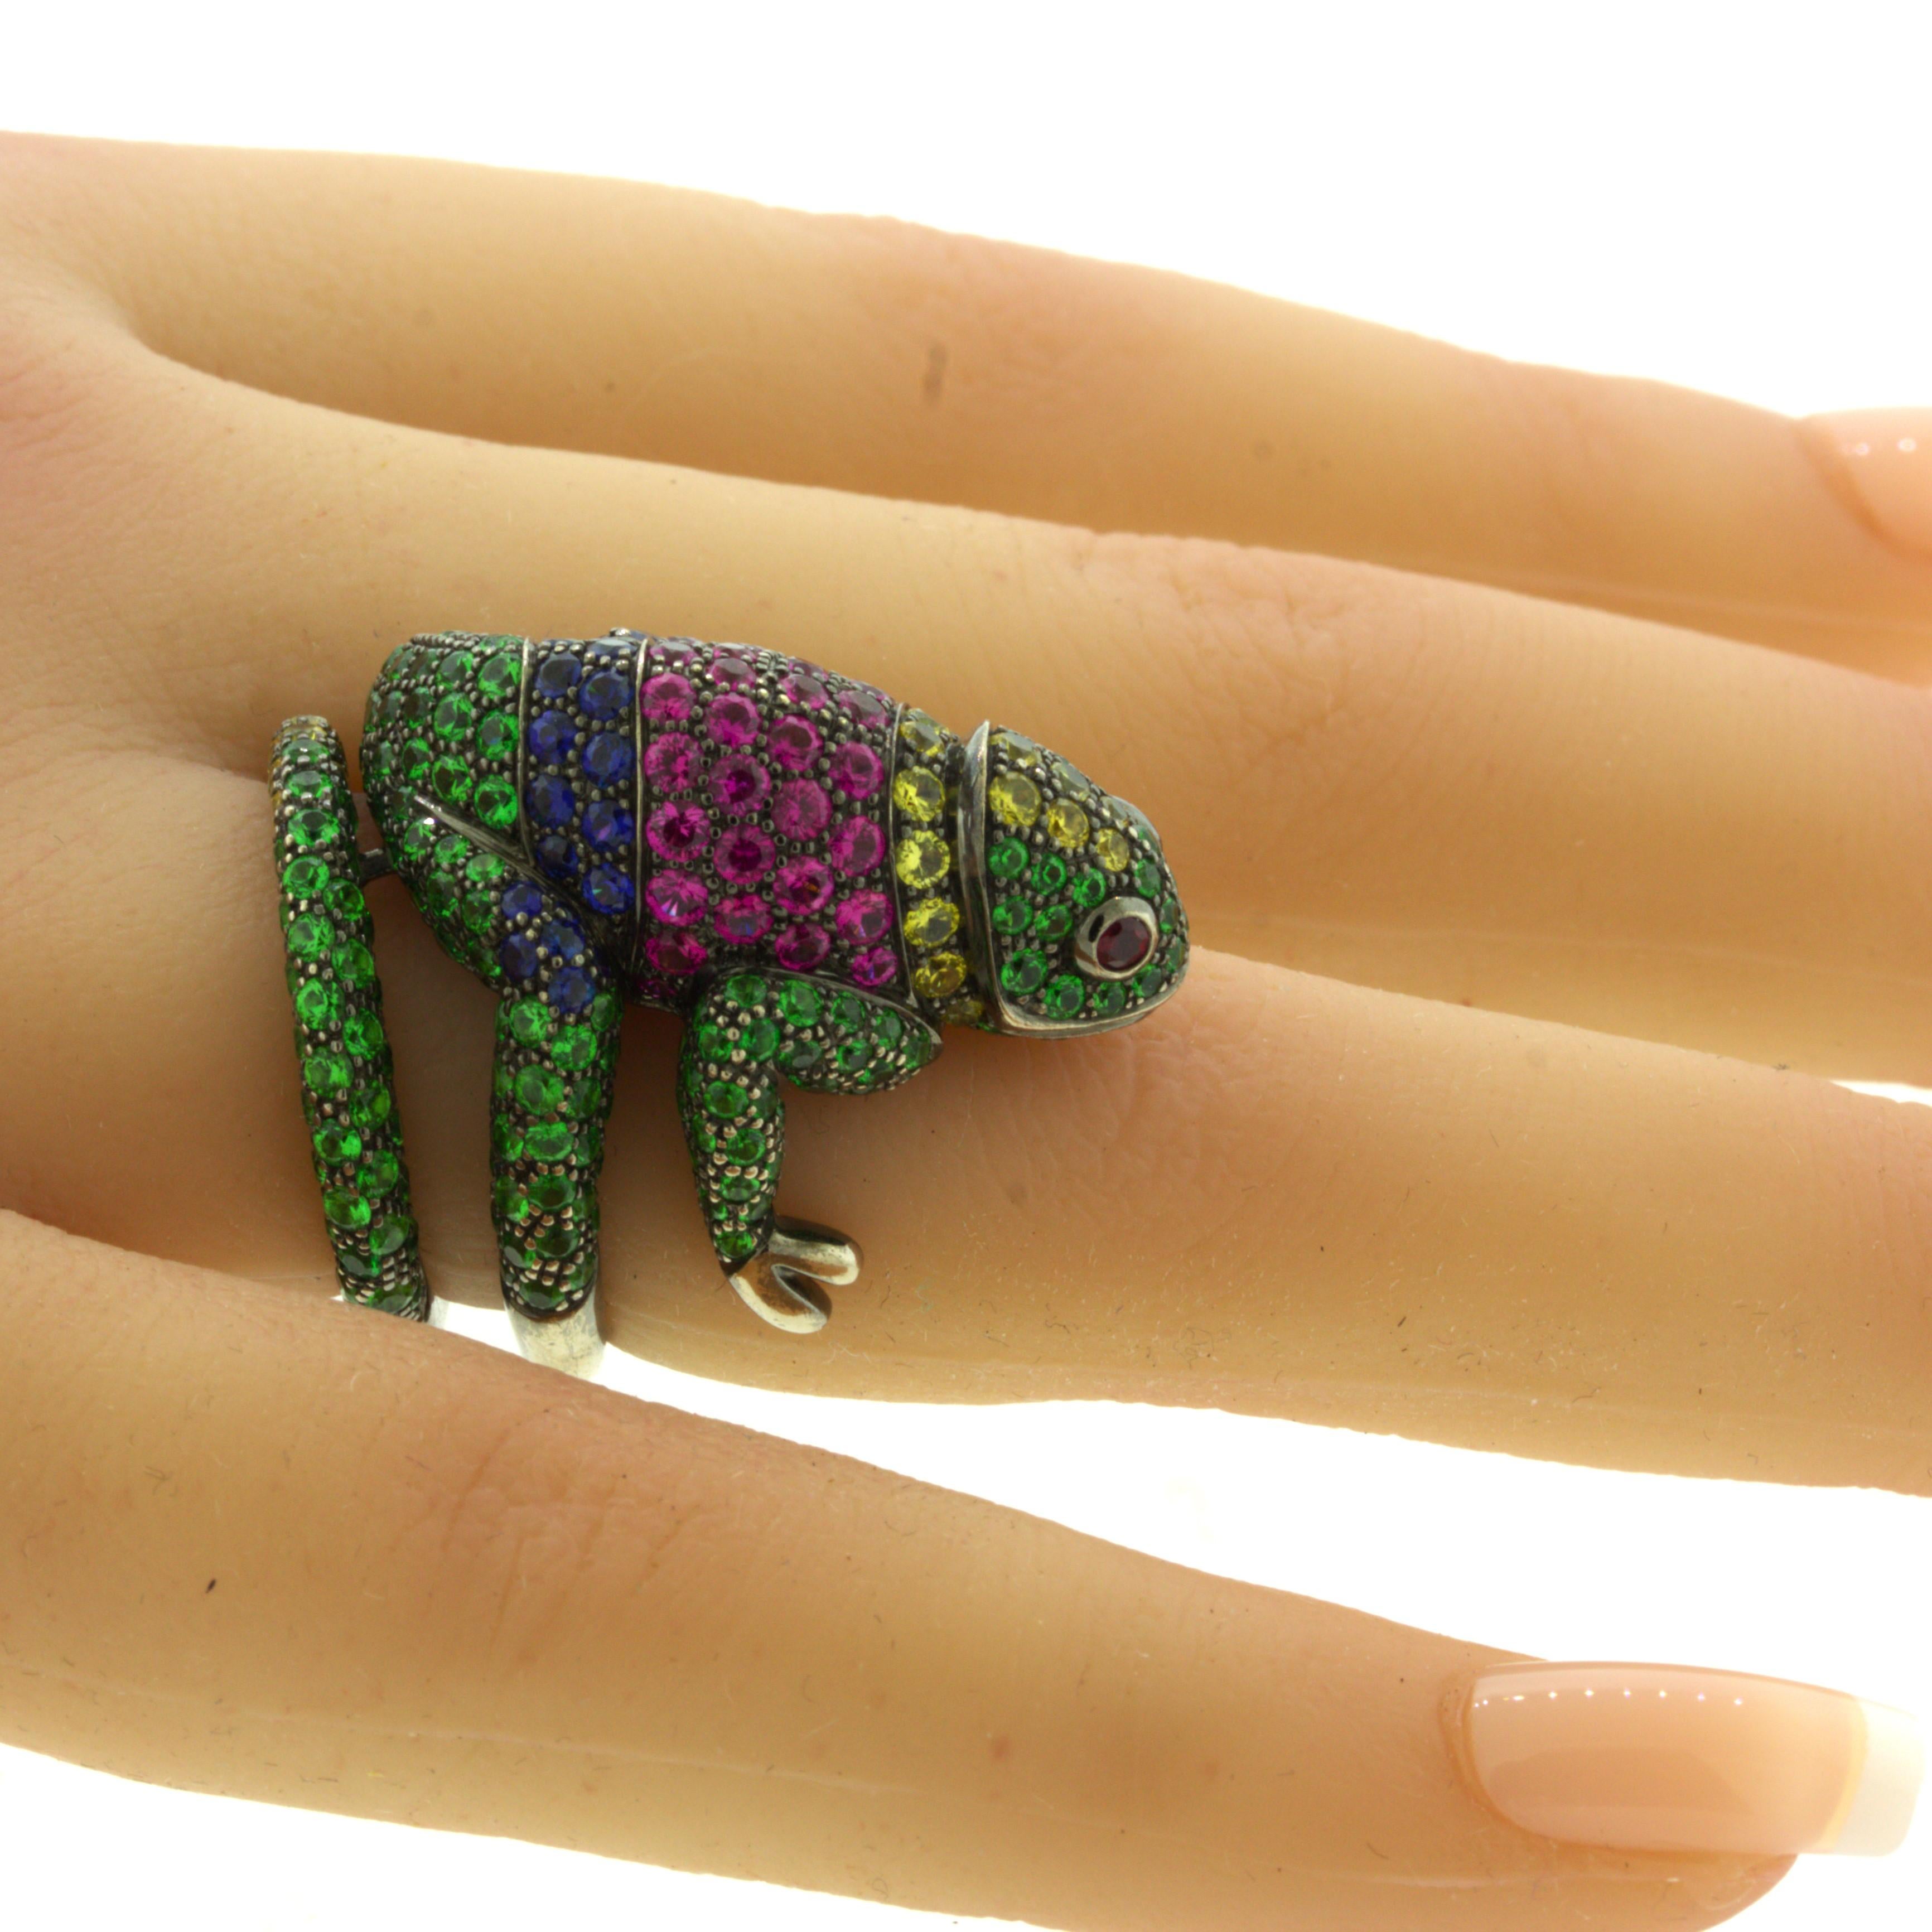 Boucheron “Masy the Chameleon” Tsavorite Sapphire Ruby Gold Animal Ring, French In New Condition For Sale In Beverly Hills, CA